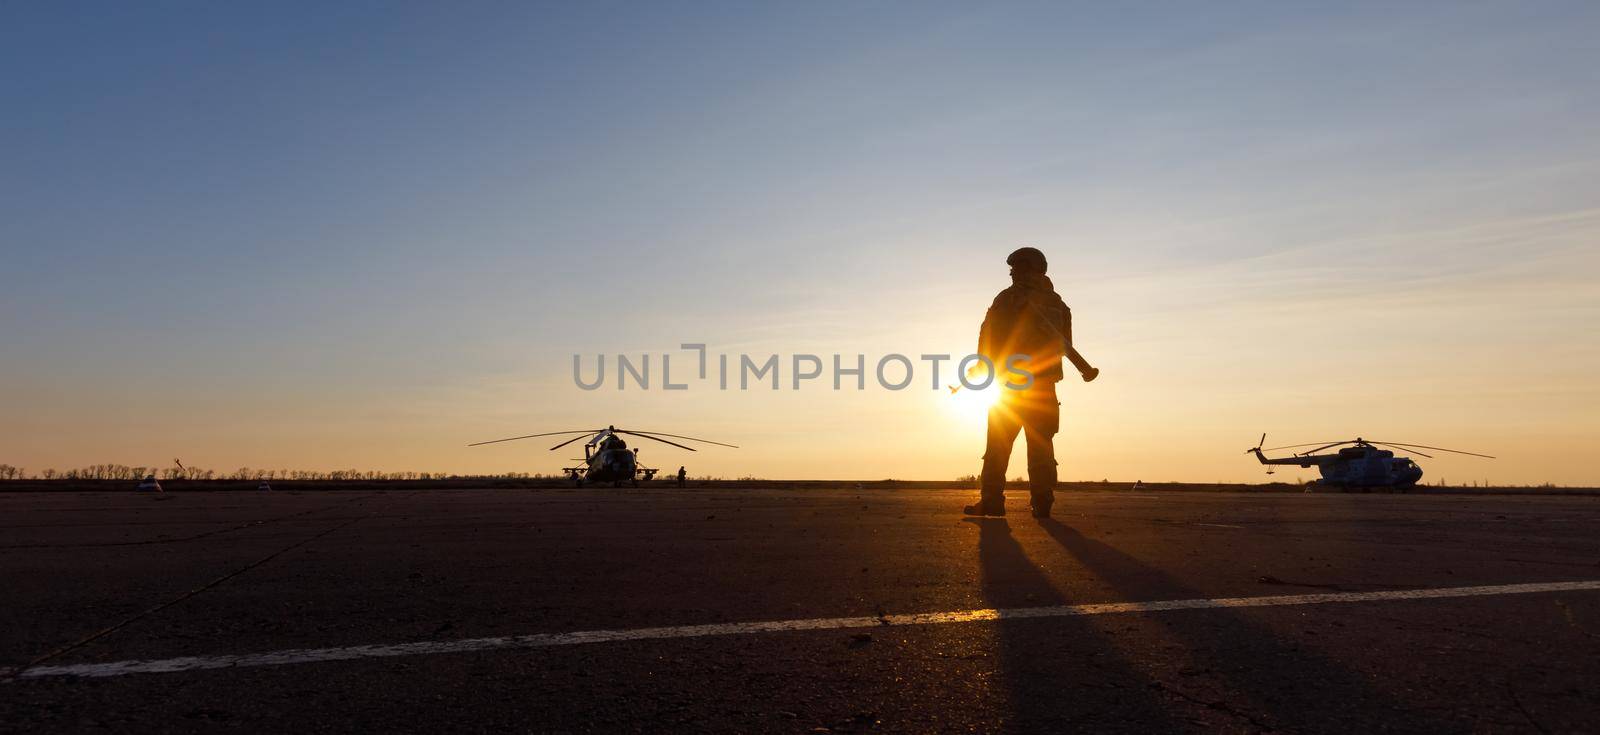 MARIUPOL, UKRAINE - Nov. 16, 2017: Silhouette of a military man with a machine gun in a combat post against the helicopters and sunset sky during festivities on occasion of the Day of Naval Infantry